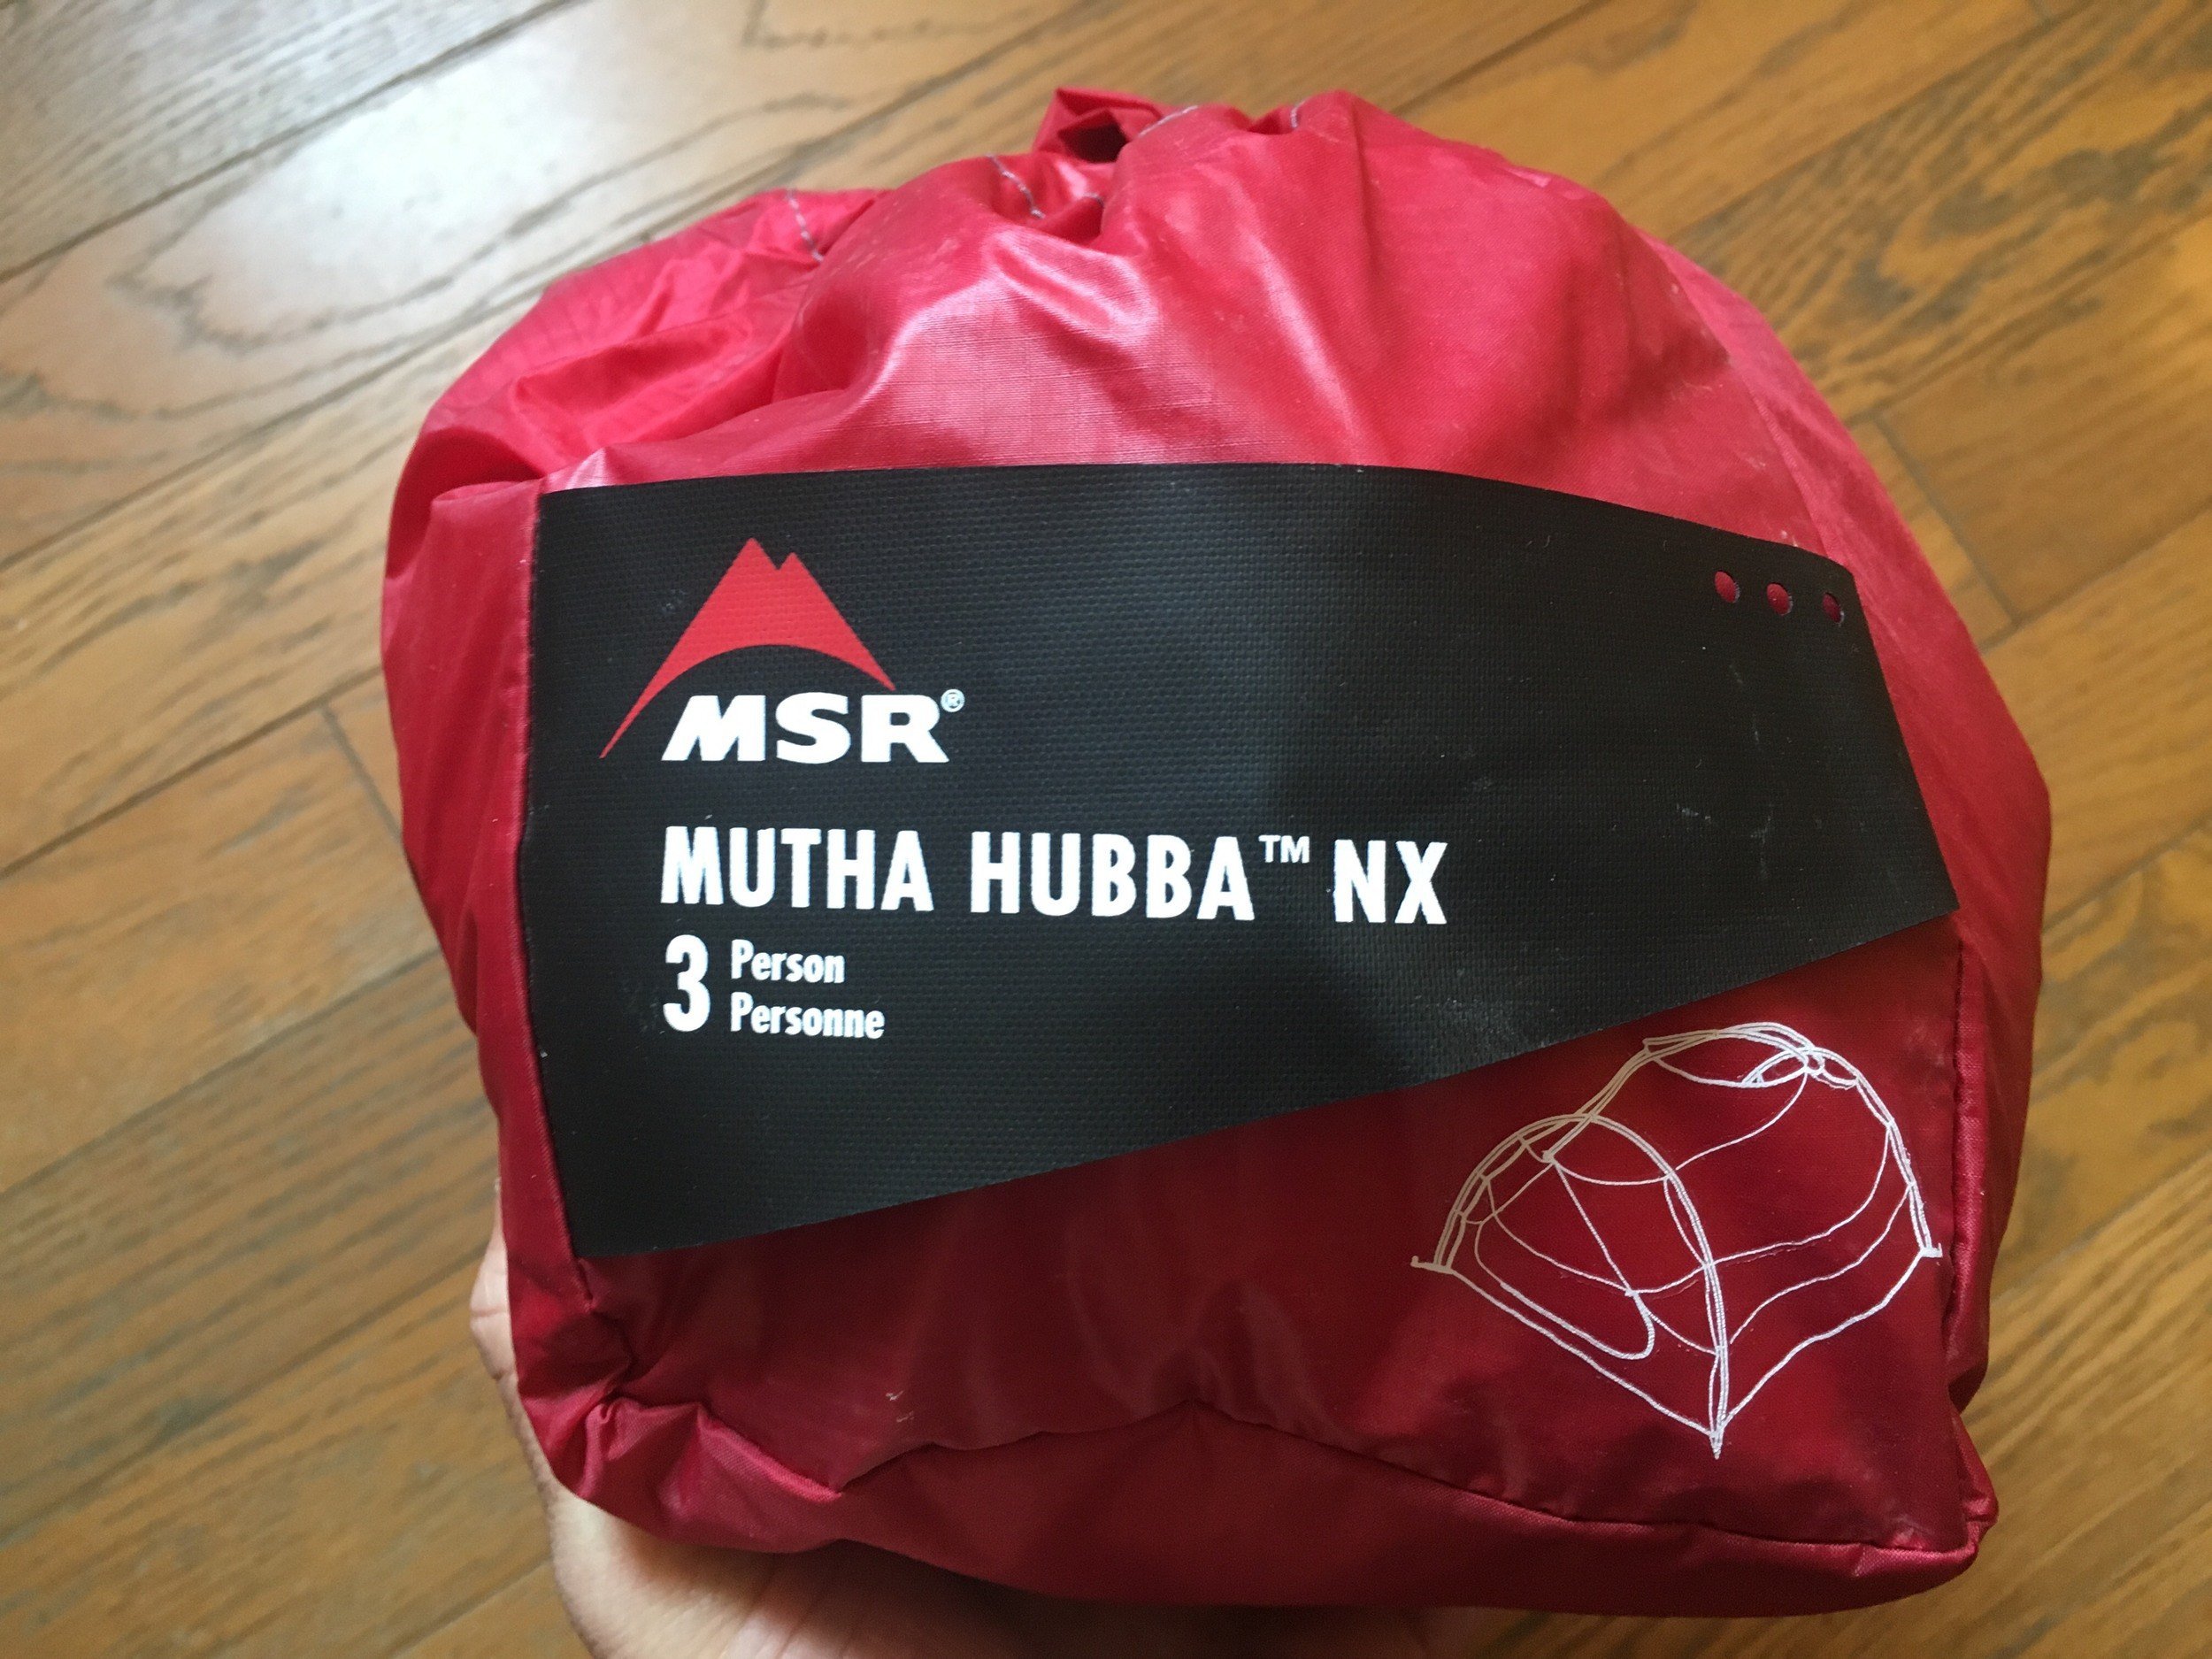 MSR Mutha Hubba review